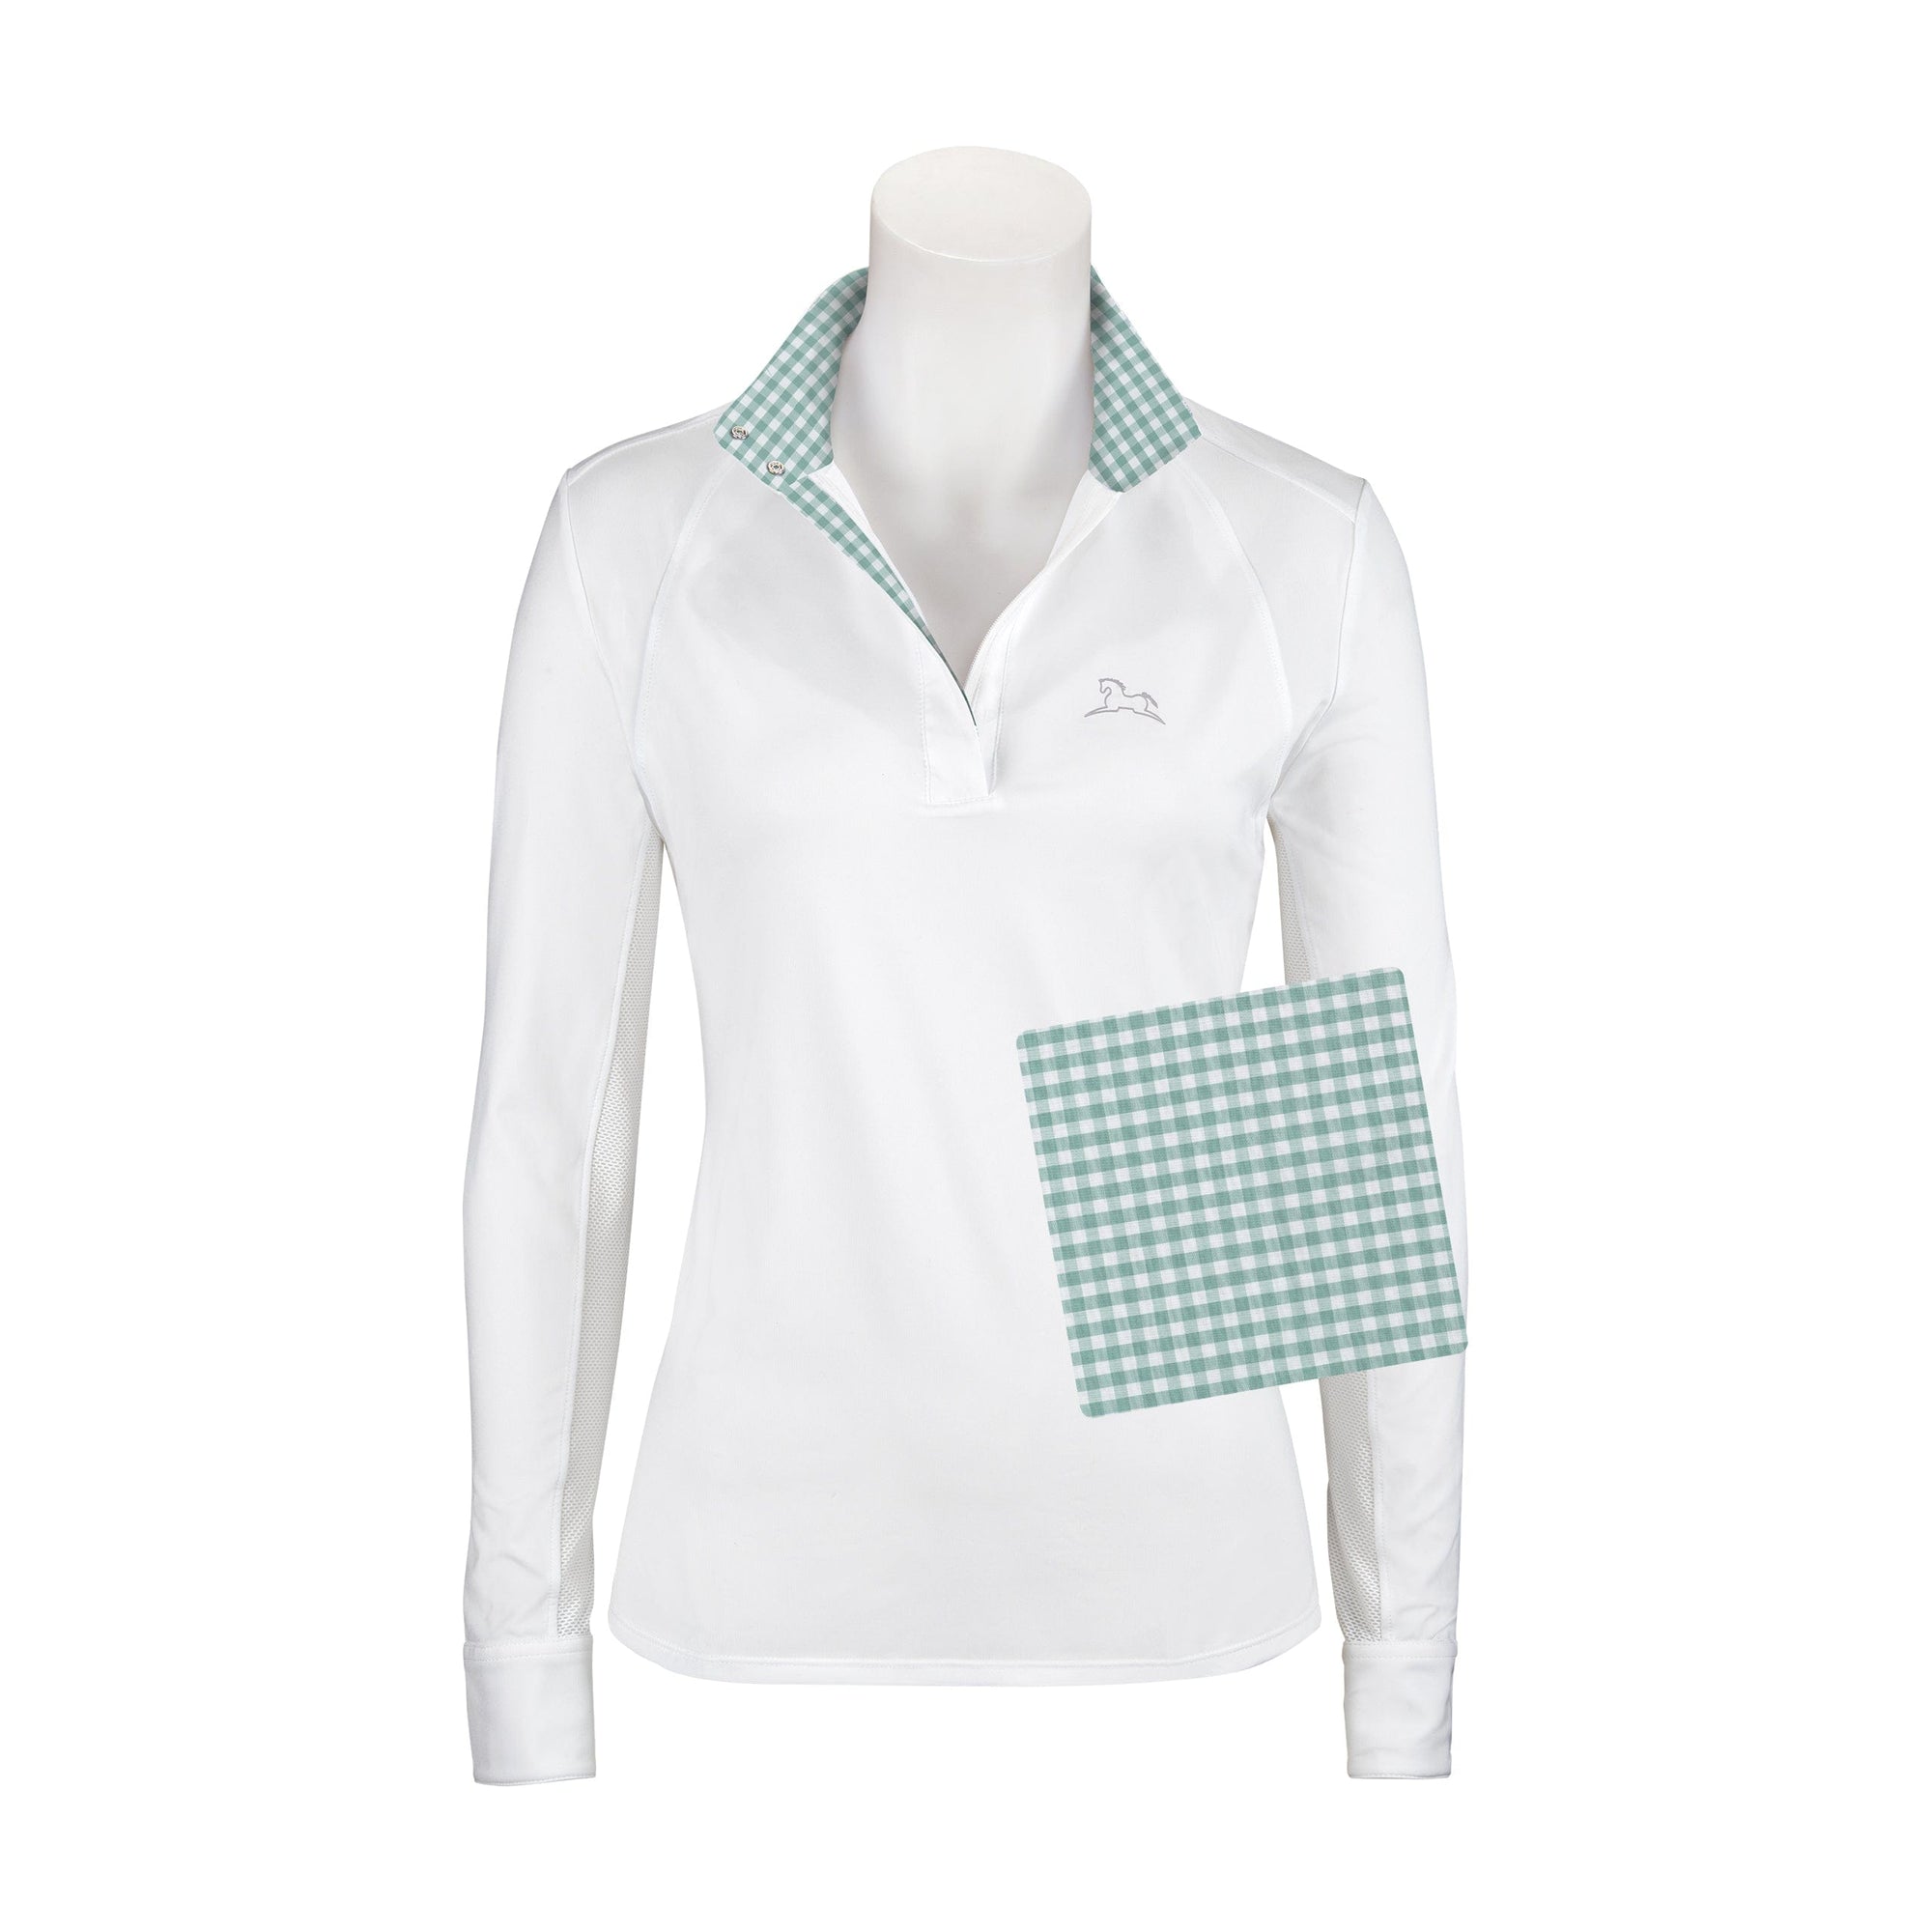 RJ Classics Show Shirt Maddie Show Shirt - Green Gingham equestrian team apparel online tack store mobile tack store custom farm apparel custom show stable clothing equestrian lifestyle horse show clothing riding clothes horses equestrian tack store